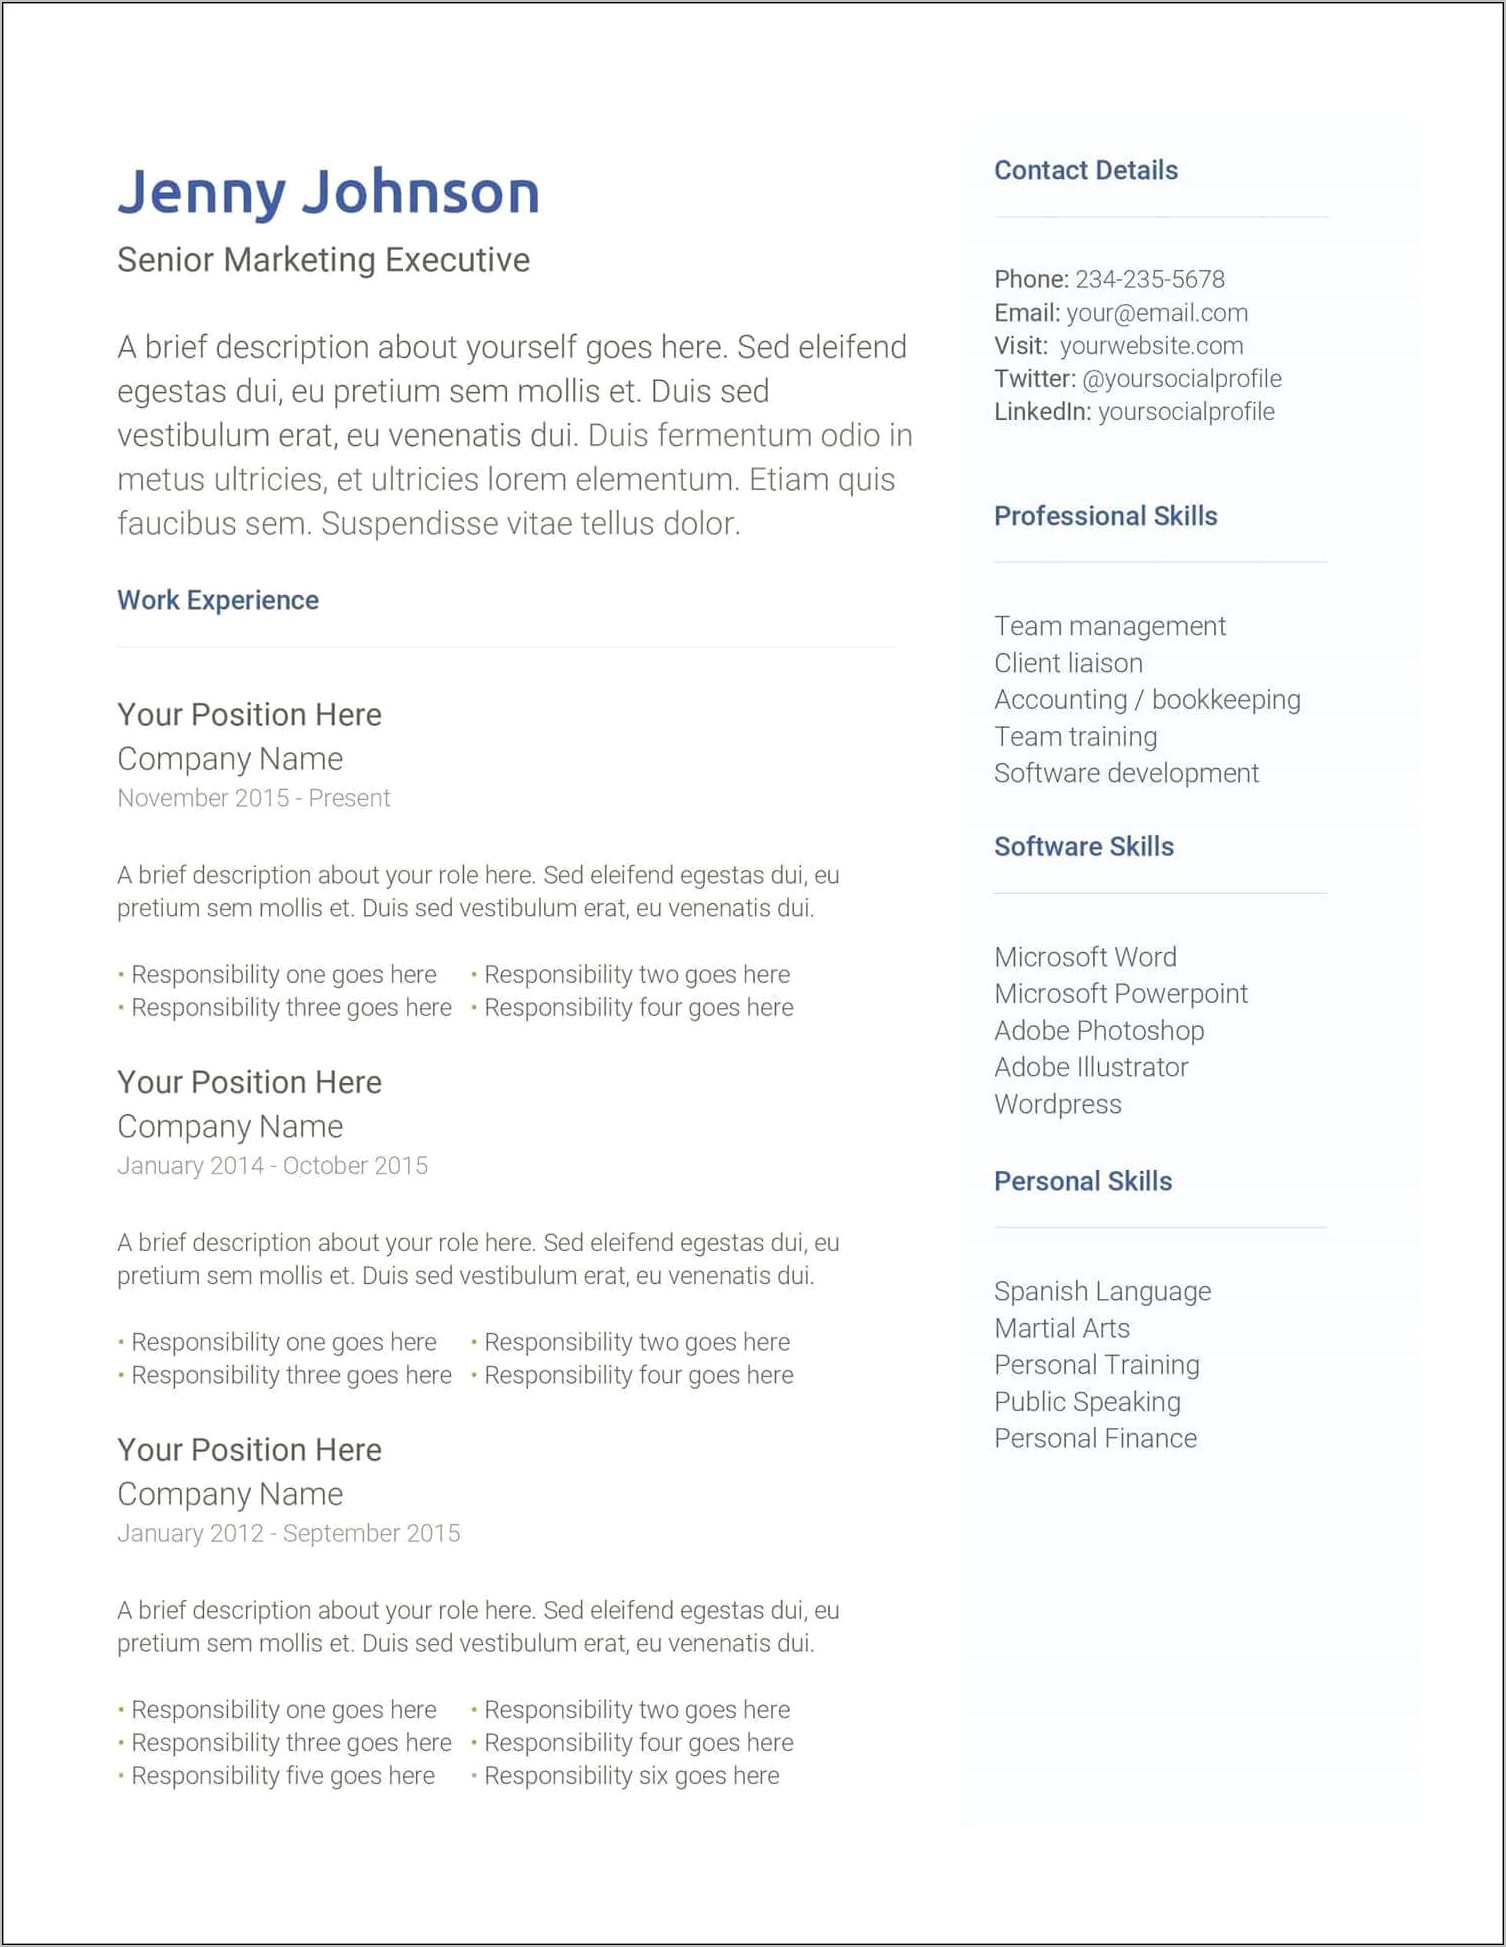 Free Resume Samples With Photo